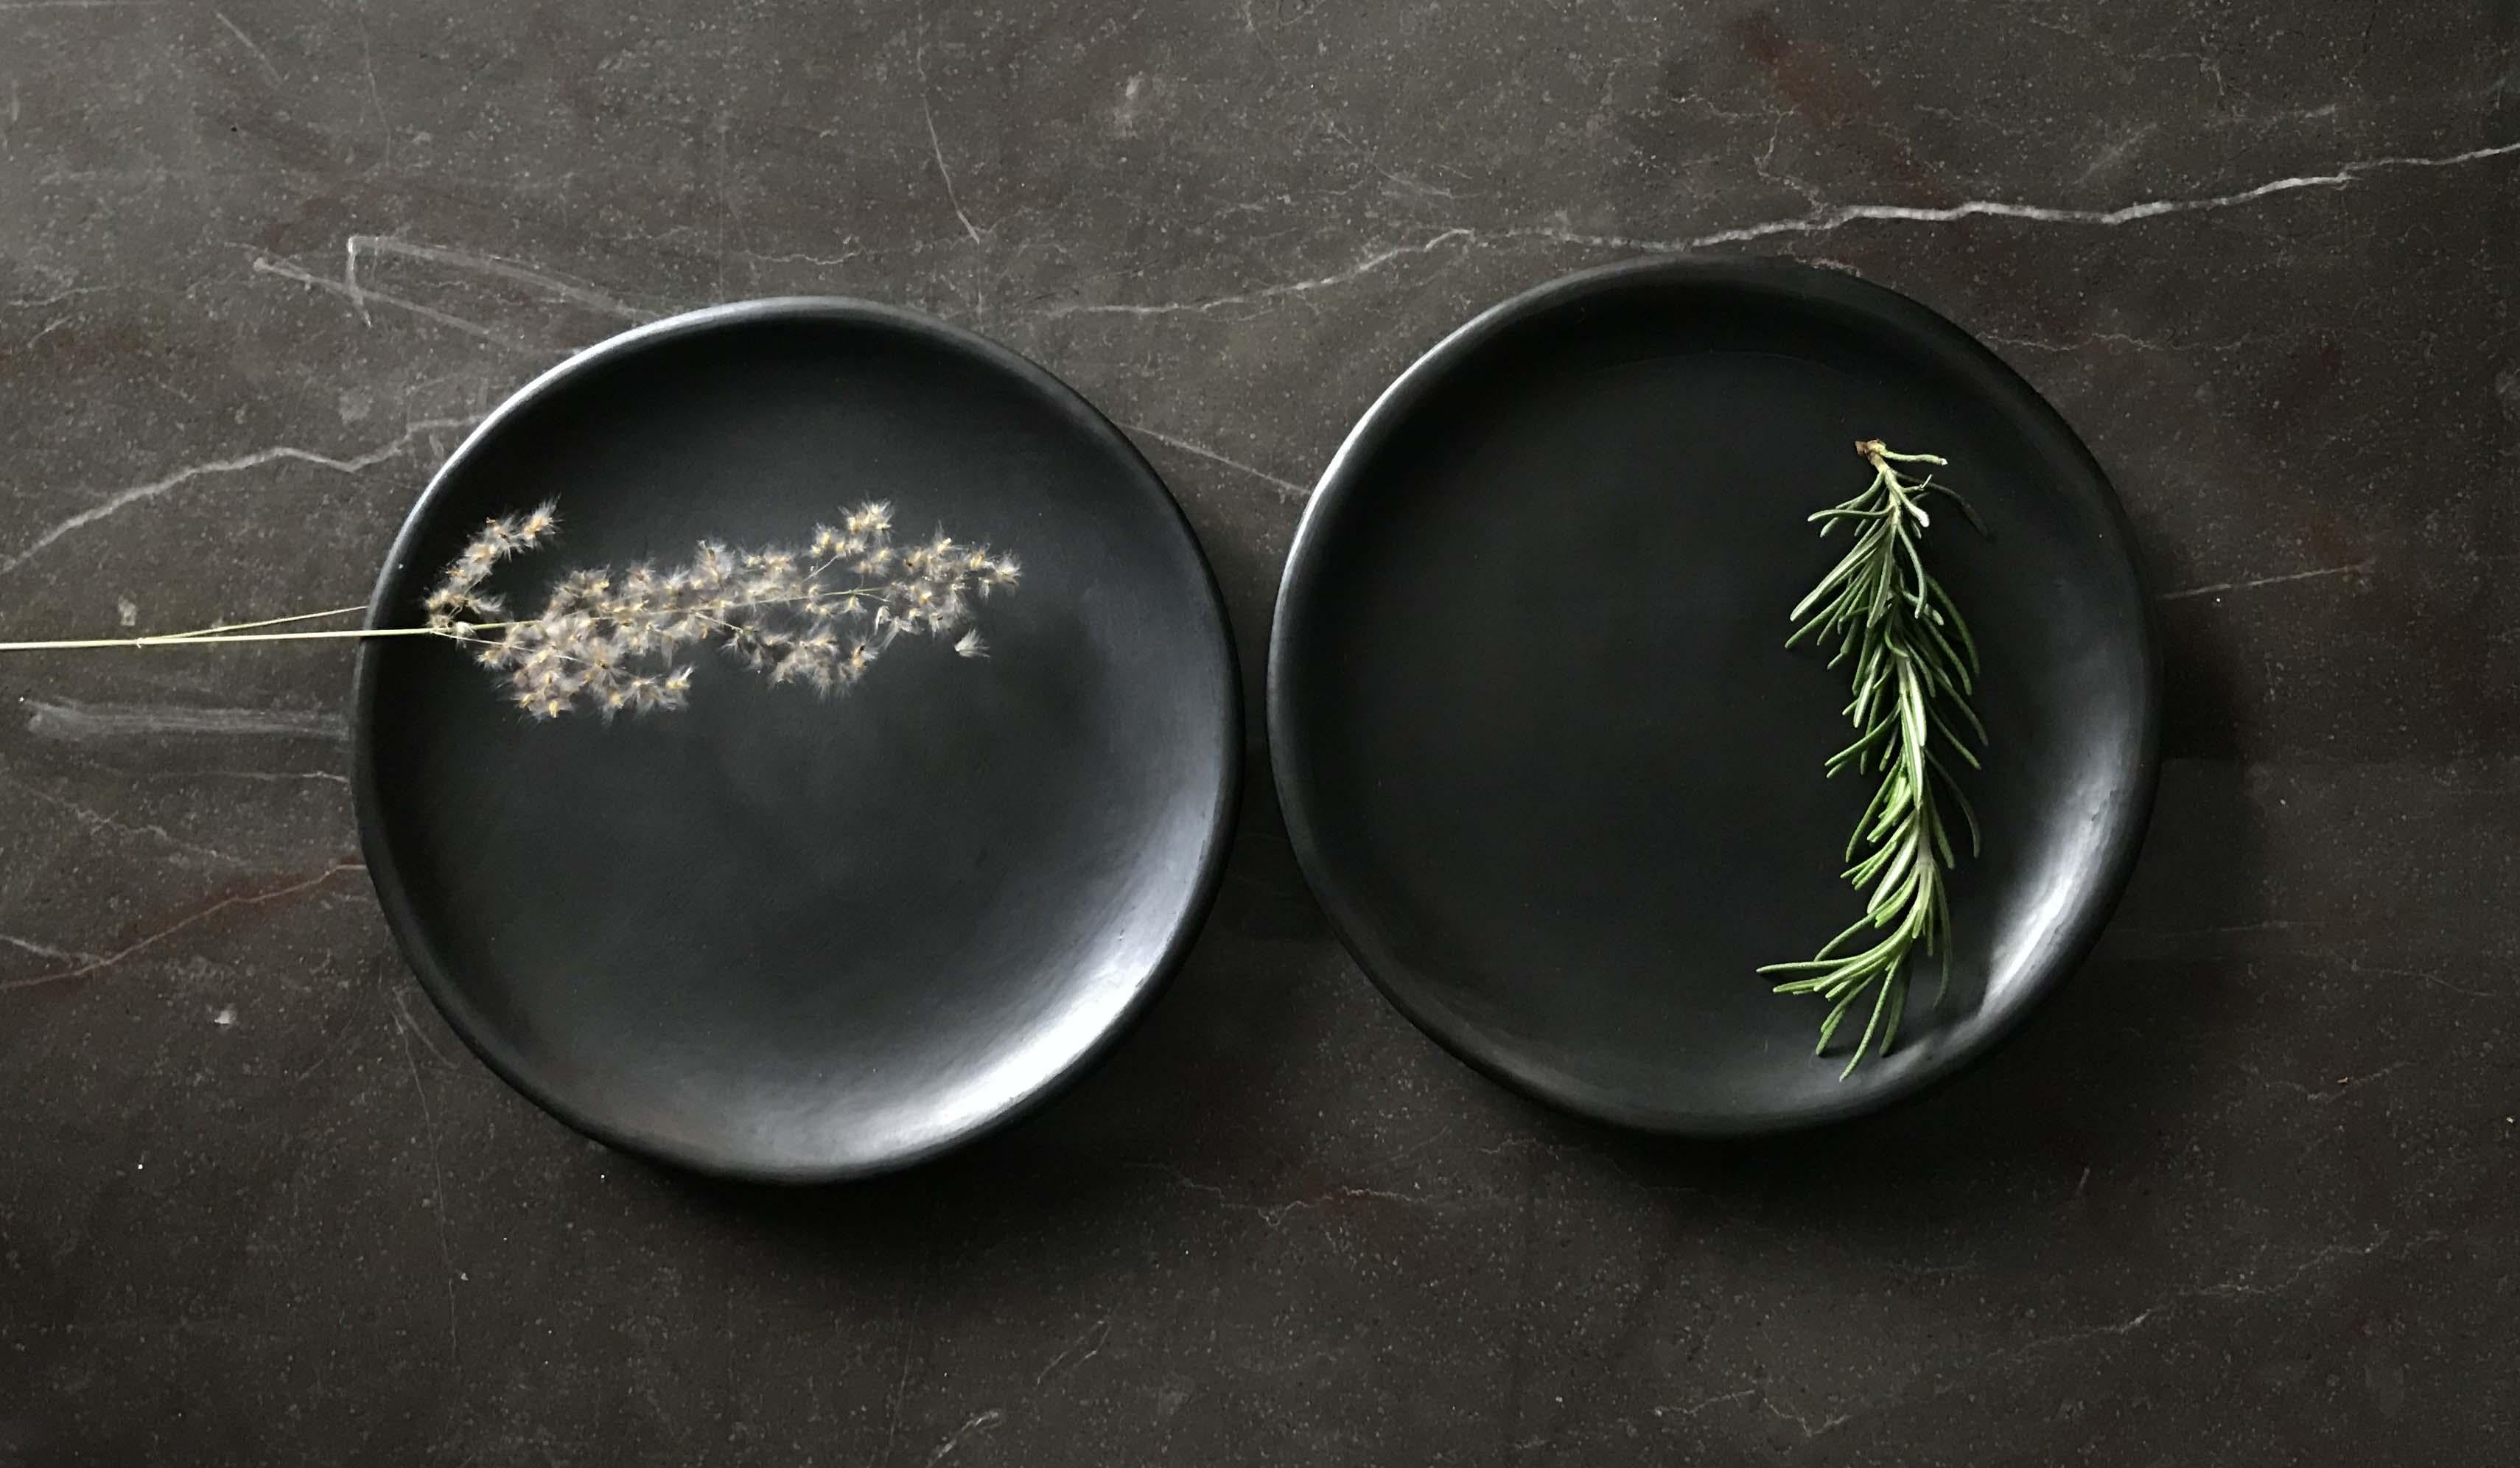 Oaxacan black clay 20cm plates handmade tableware burnished barro negro Oaxaca. Set of 4 pieces 

The soft and rich colour makes this side plate a stylish partner to bread, butter or more spectacular starters.

Handmade in Oaxaca, a state rich